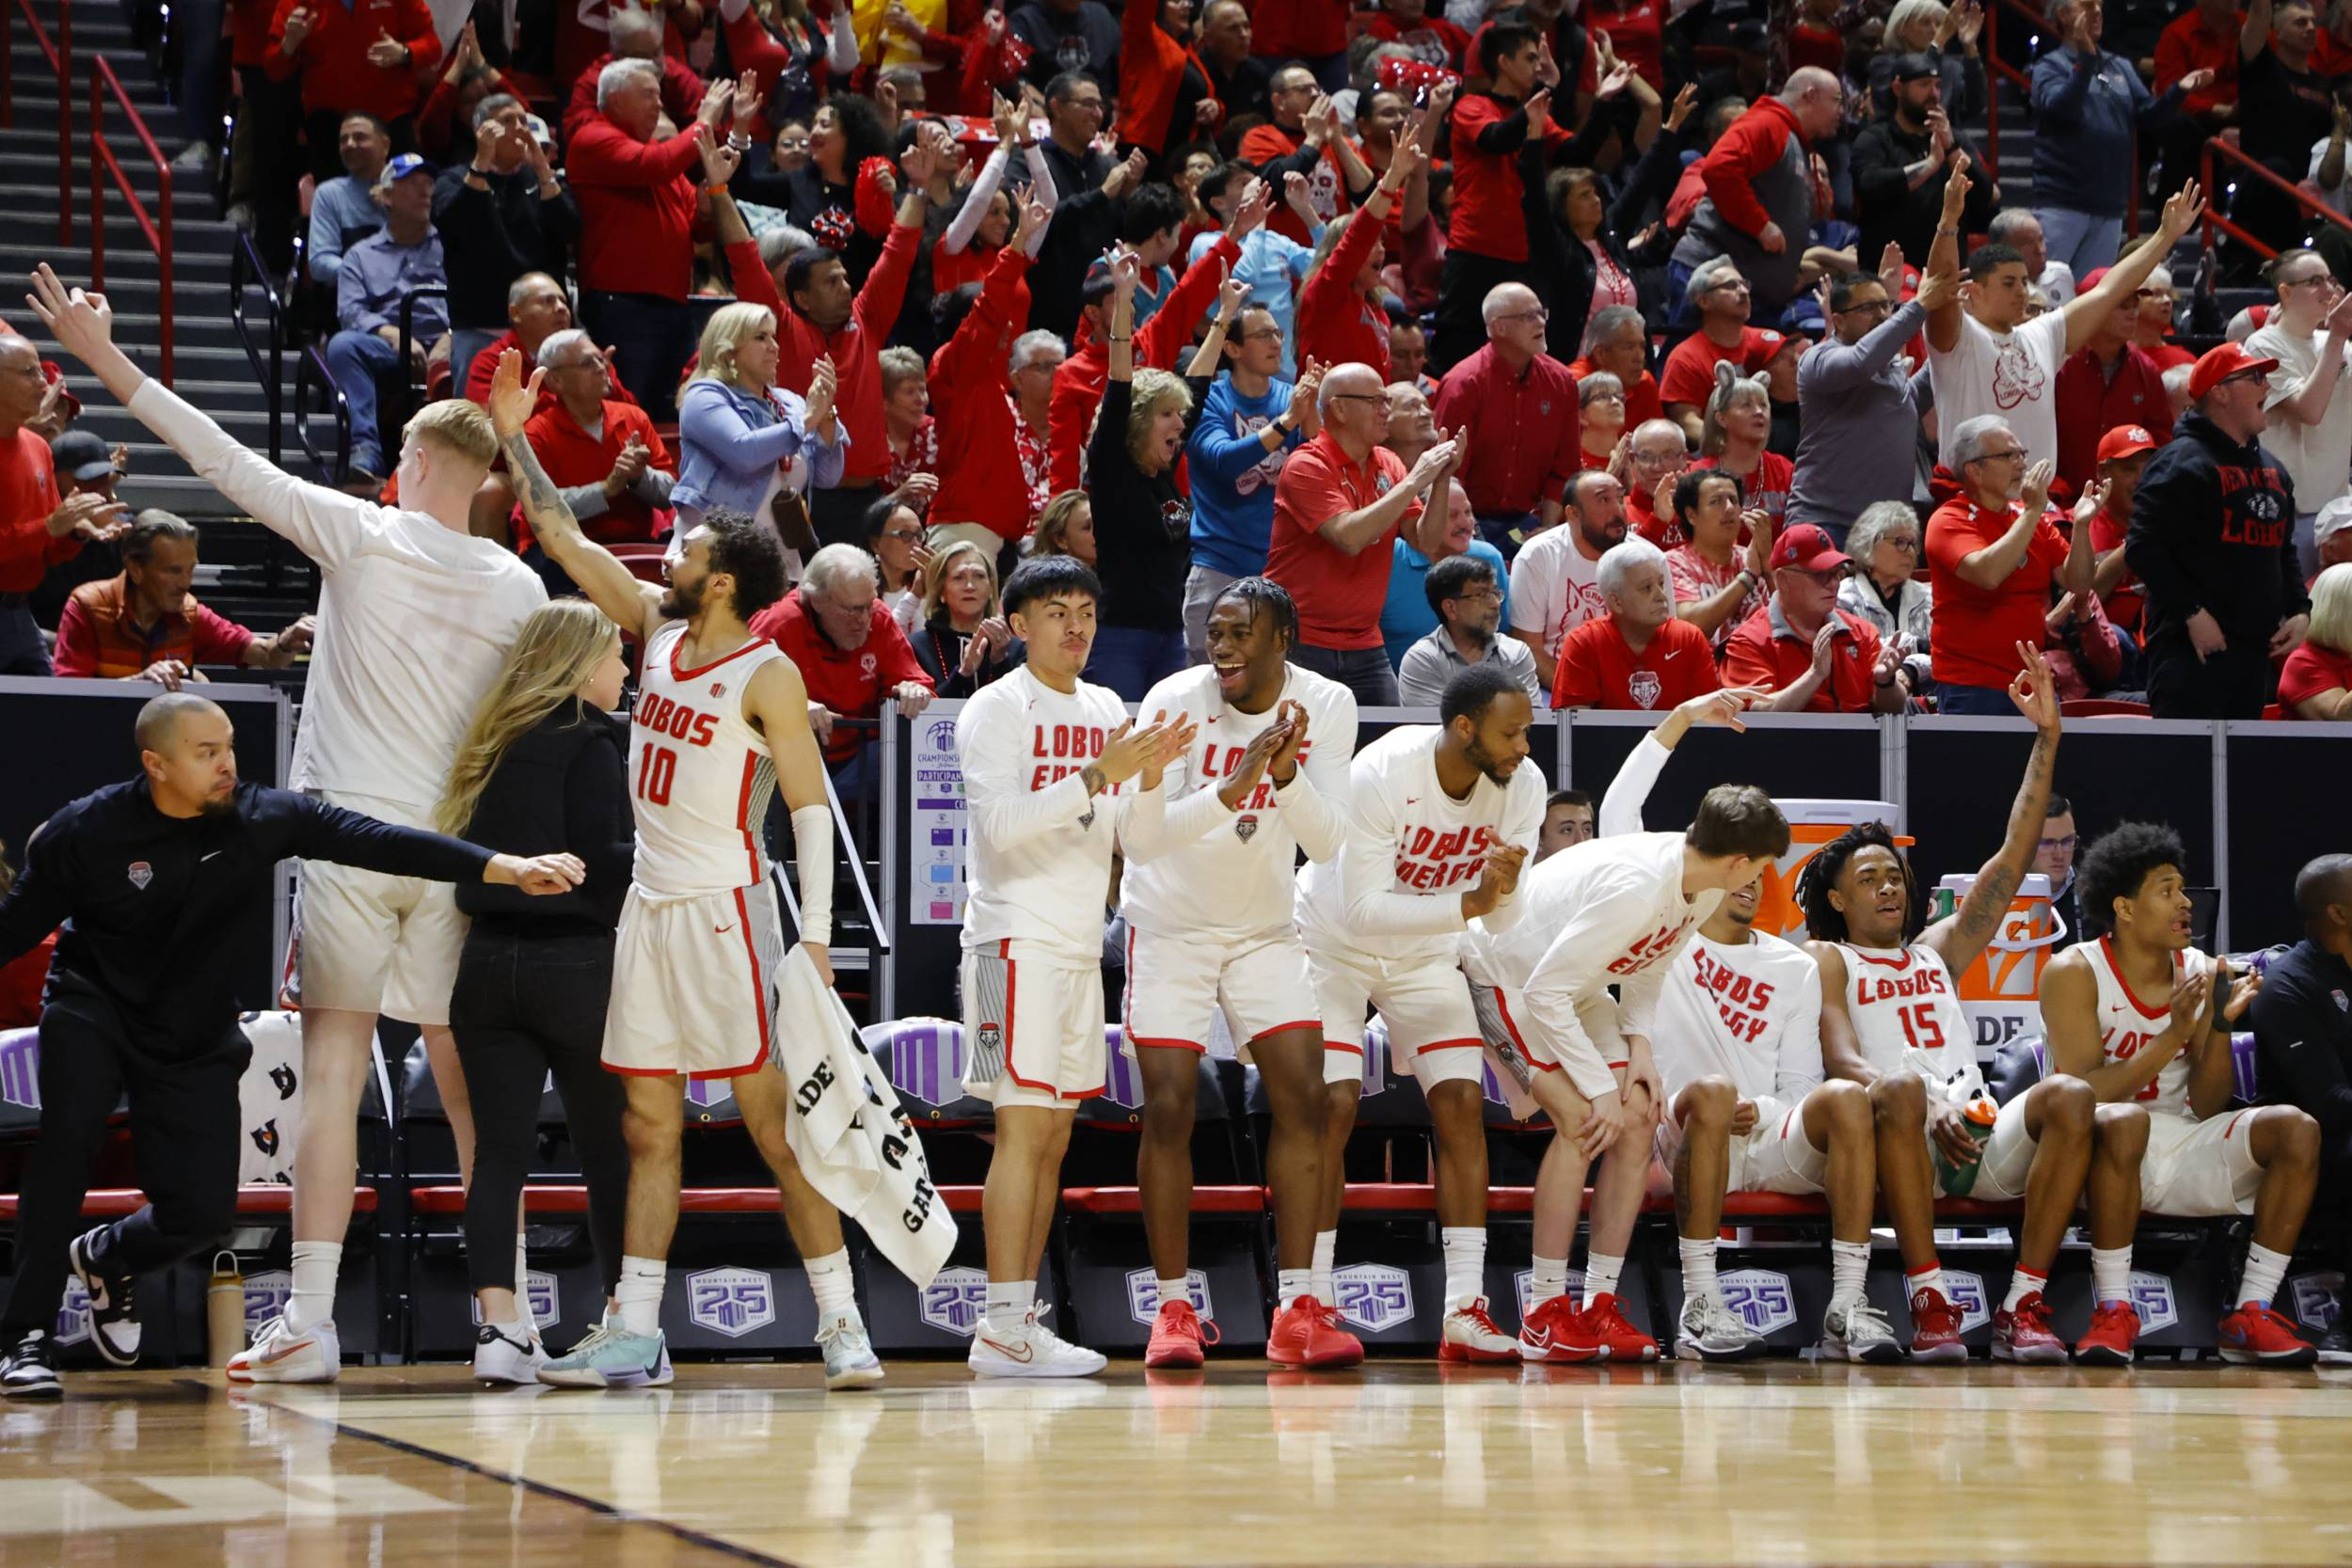 New Mexico Heading to MW Championship Title Game